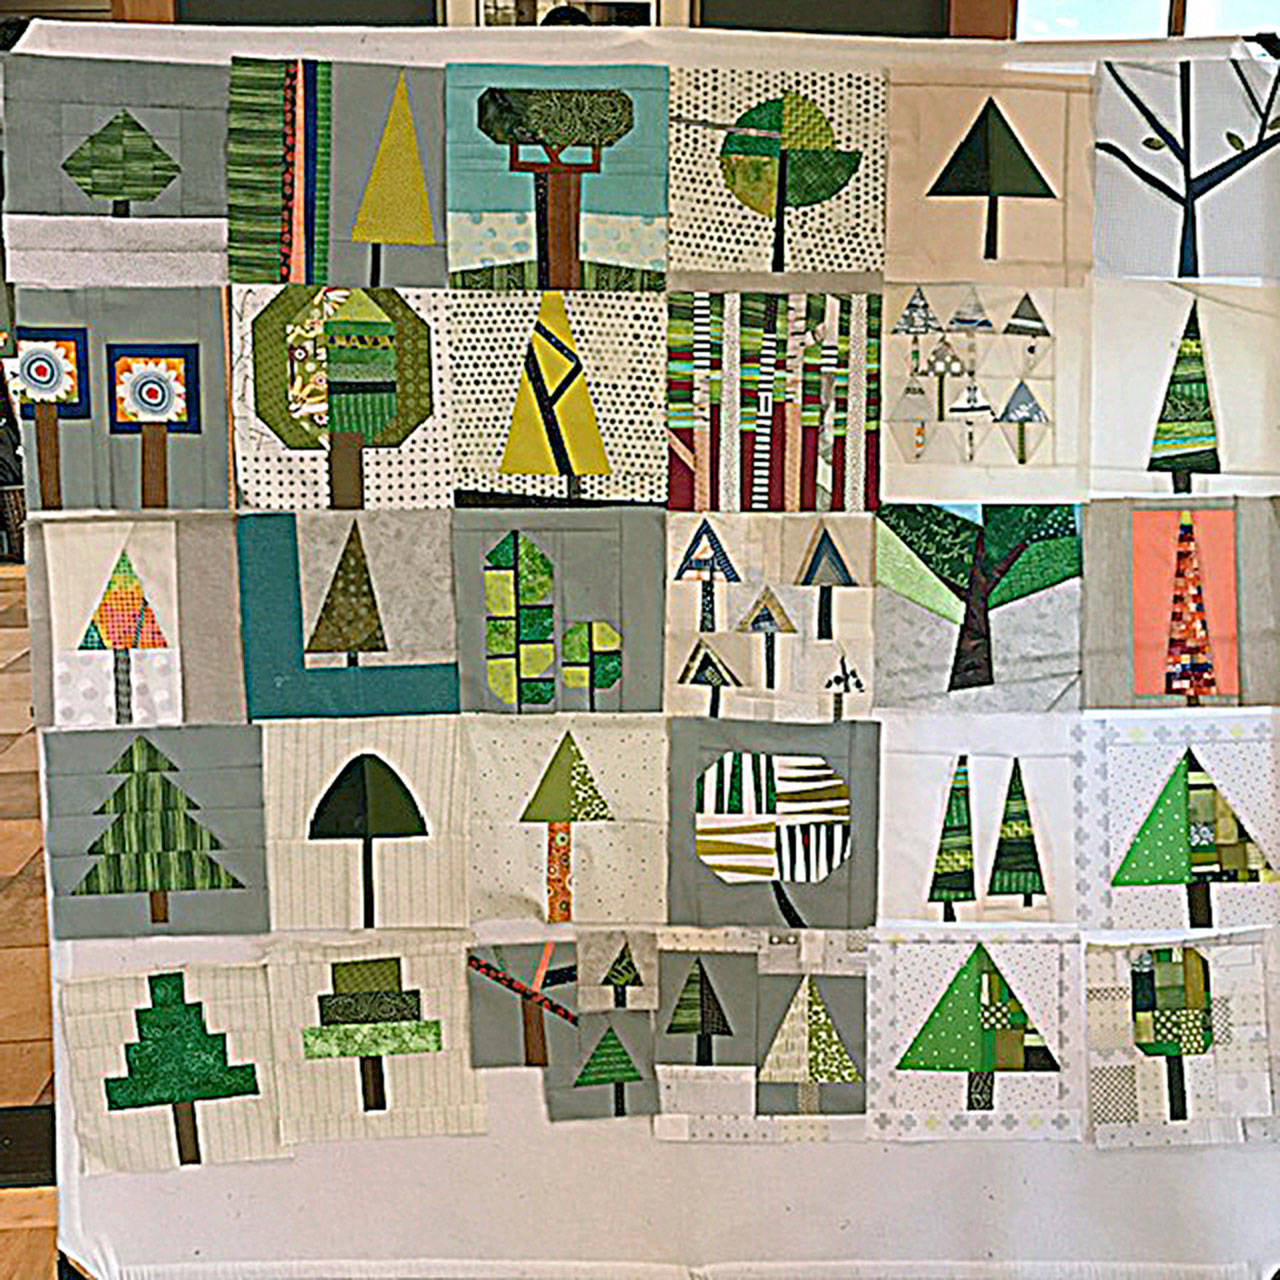 Photo courtesy of Kathy Ruwe | As part of an international group effort by many similar clubs and guilds, the Bainbridge Island Modern Quilt Guild has spent the past weeks assembling blocks (the squares that make up a quilt) to be sent to Australia and assembled into quilts, which will then be given to those who have been displaced by the fires.